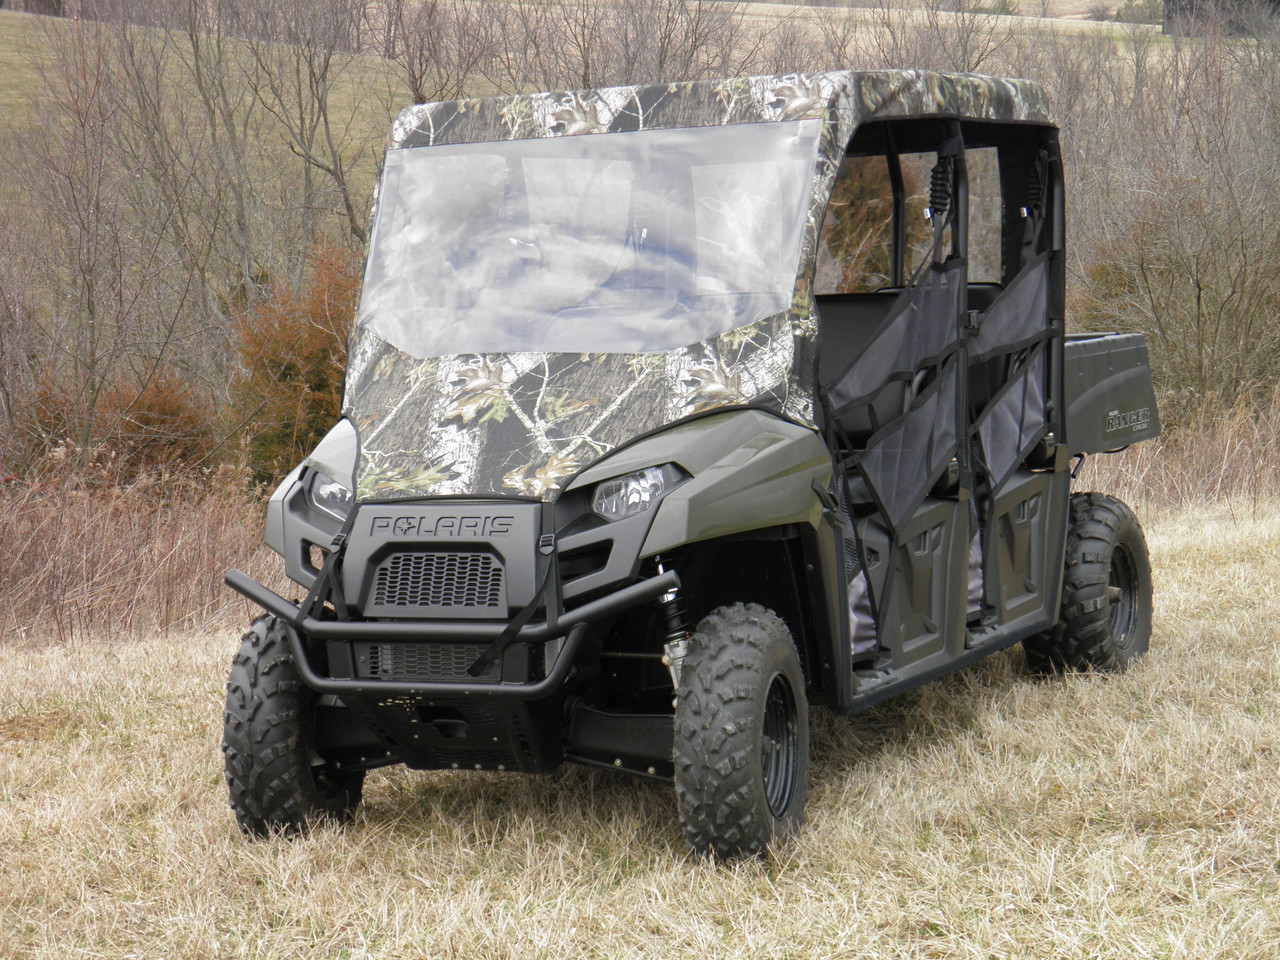 3 Star side x side Polaris Ranger Crew 570-6/800 vinyl windshield top and rear window front angle view